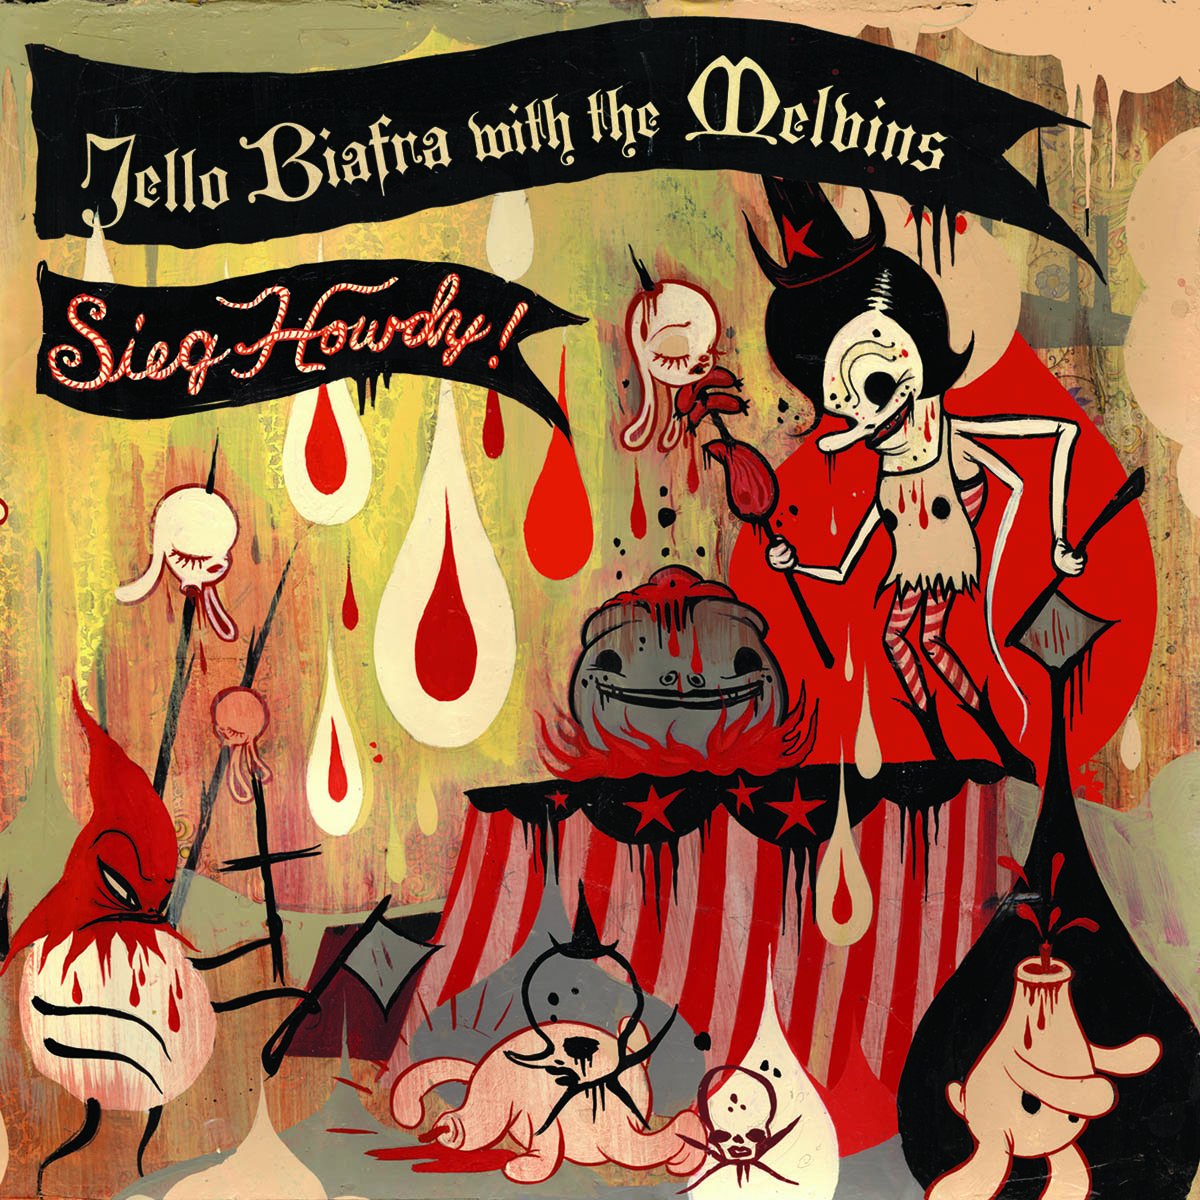 Jello Biafra with Melvins - Sieg Howdy! - LP